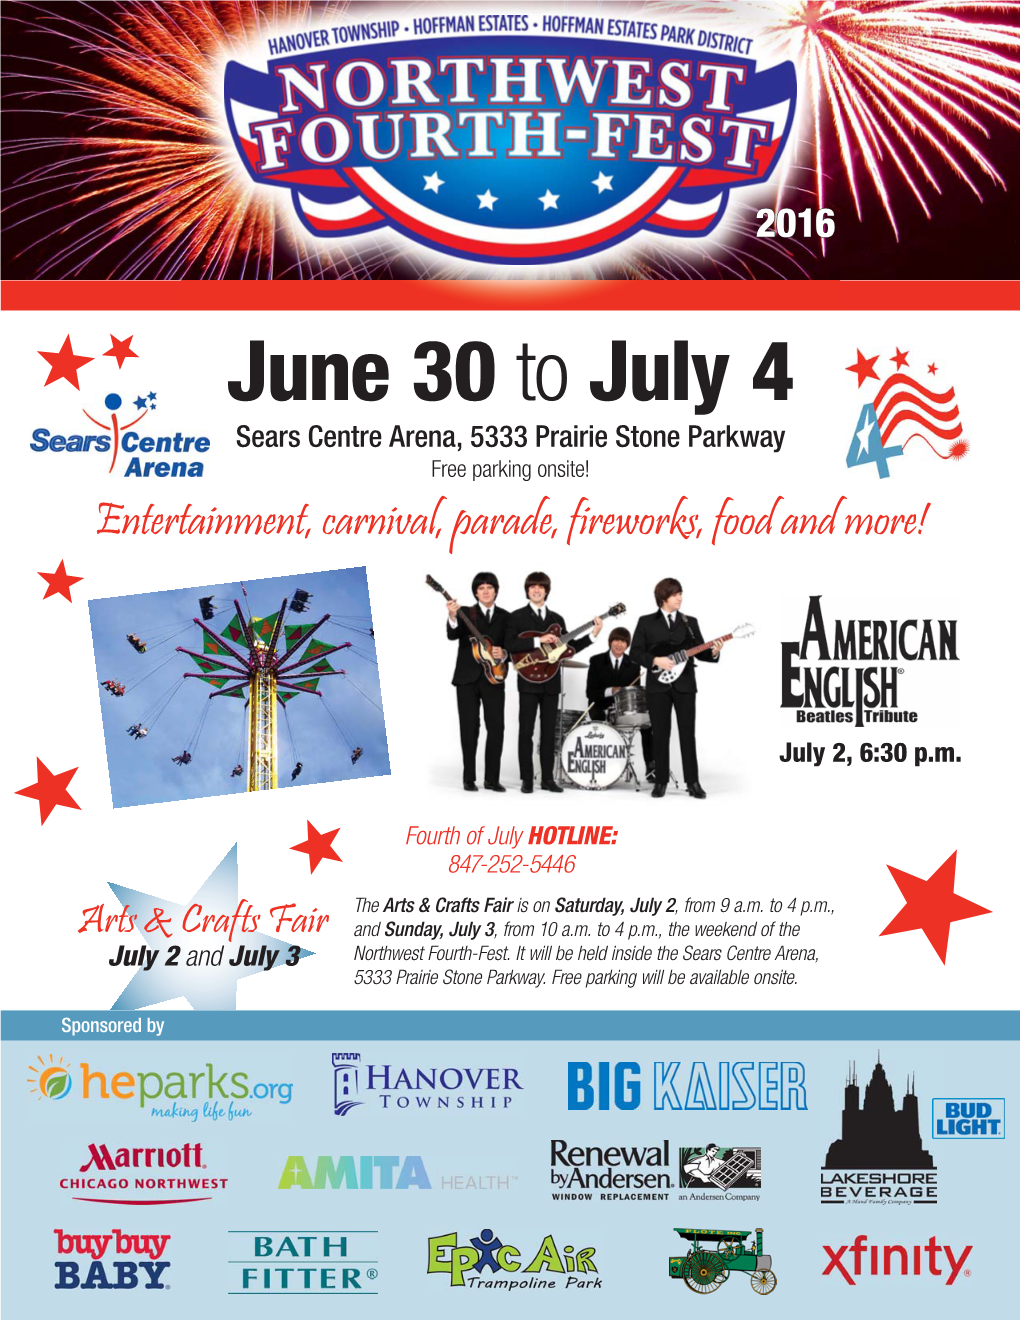 June 30 to July 4 Sears Centre Arena, 5333 Prairie Stone Parkway Free Parking Onsite! Entertainment, Carnival, Parade, Fireworks, Food and More!